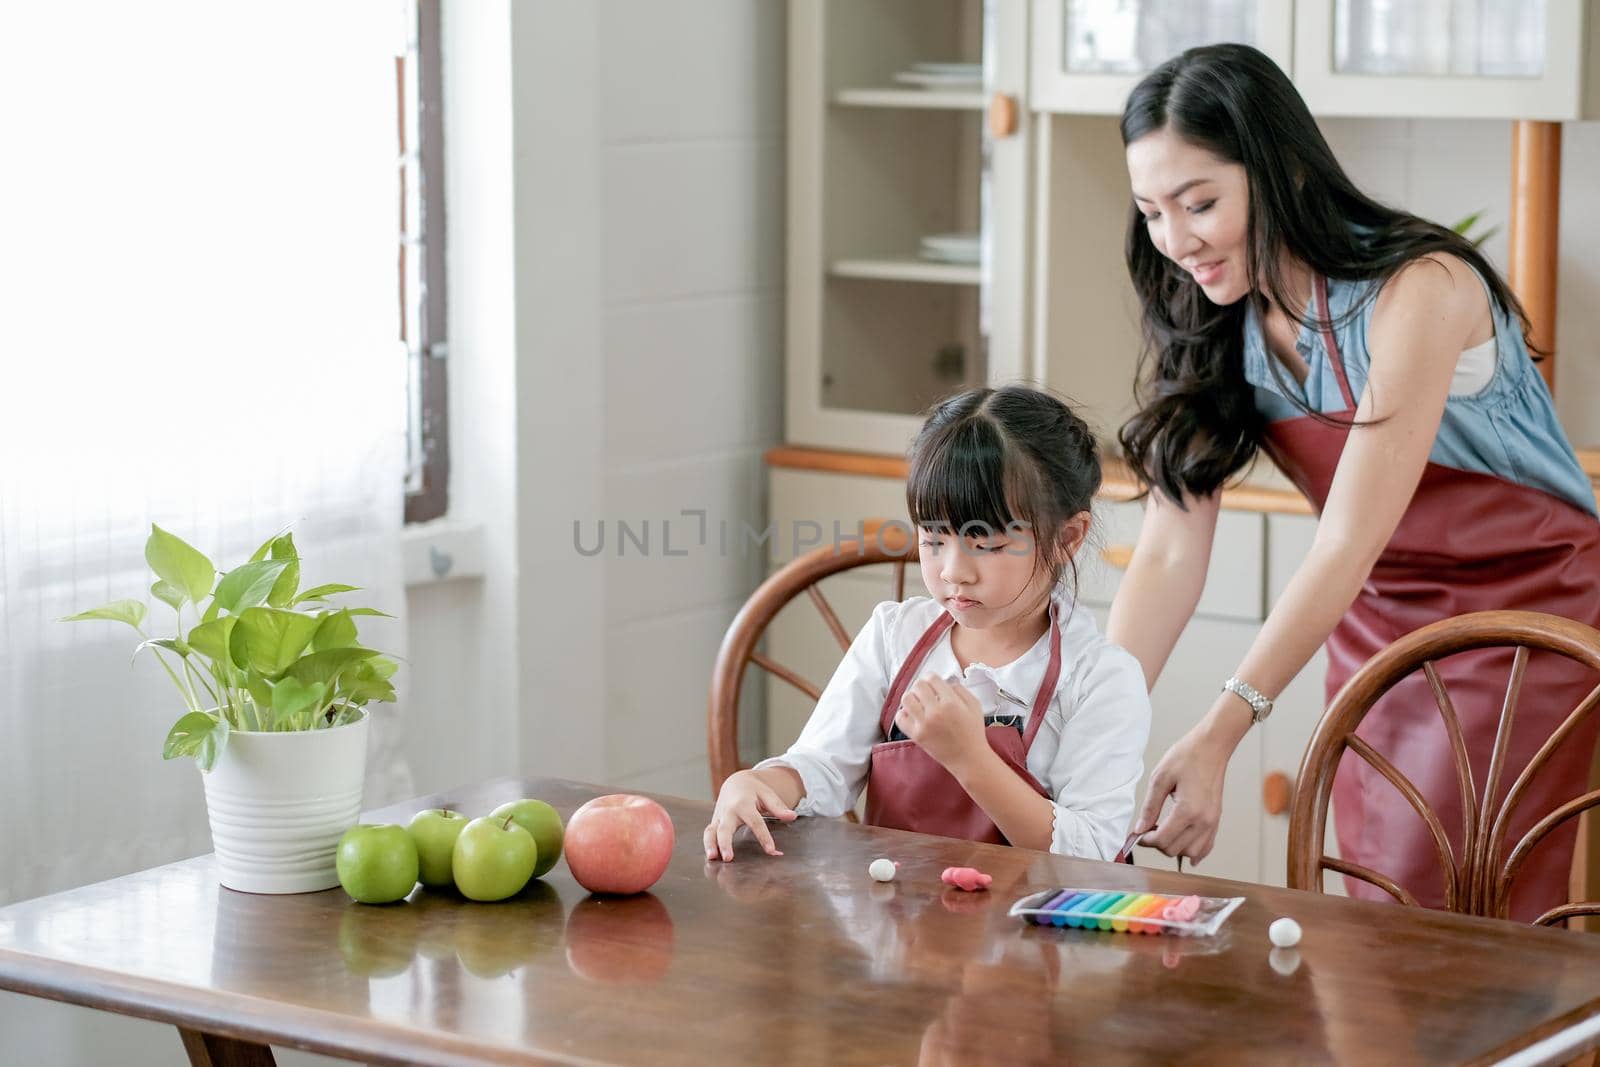 Little girl enjoy to play with play dough in kitchen on the table while her mother try to dress her with apron. Asian family with happiness concept.